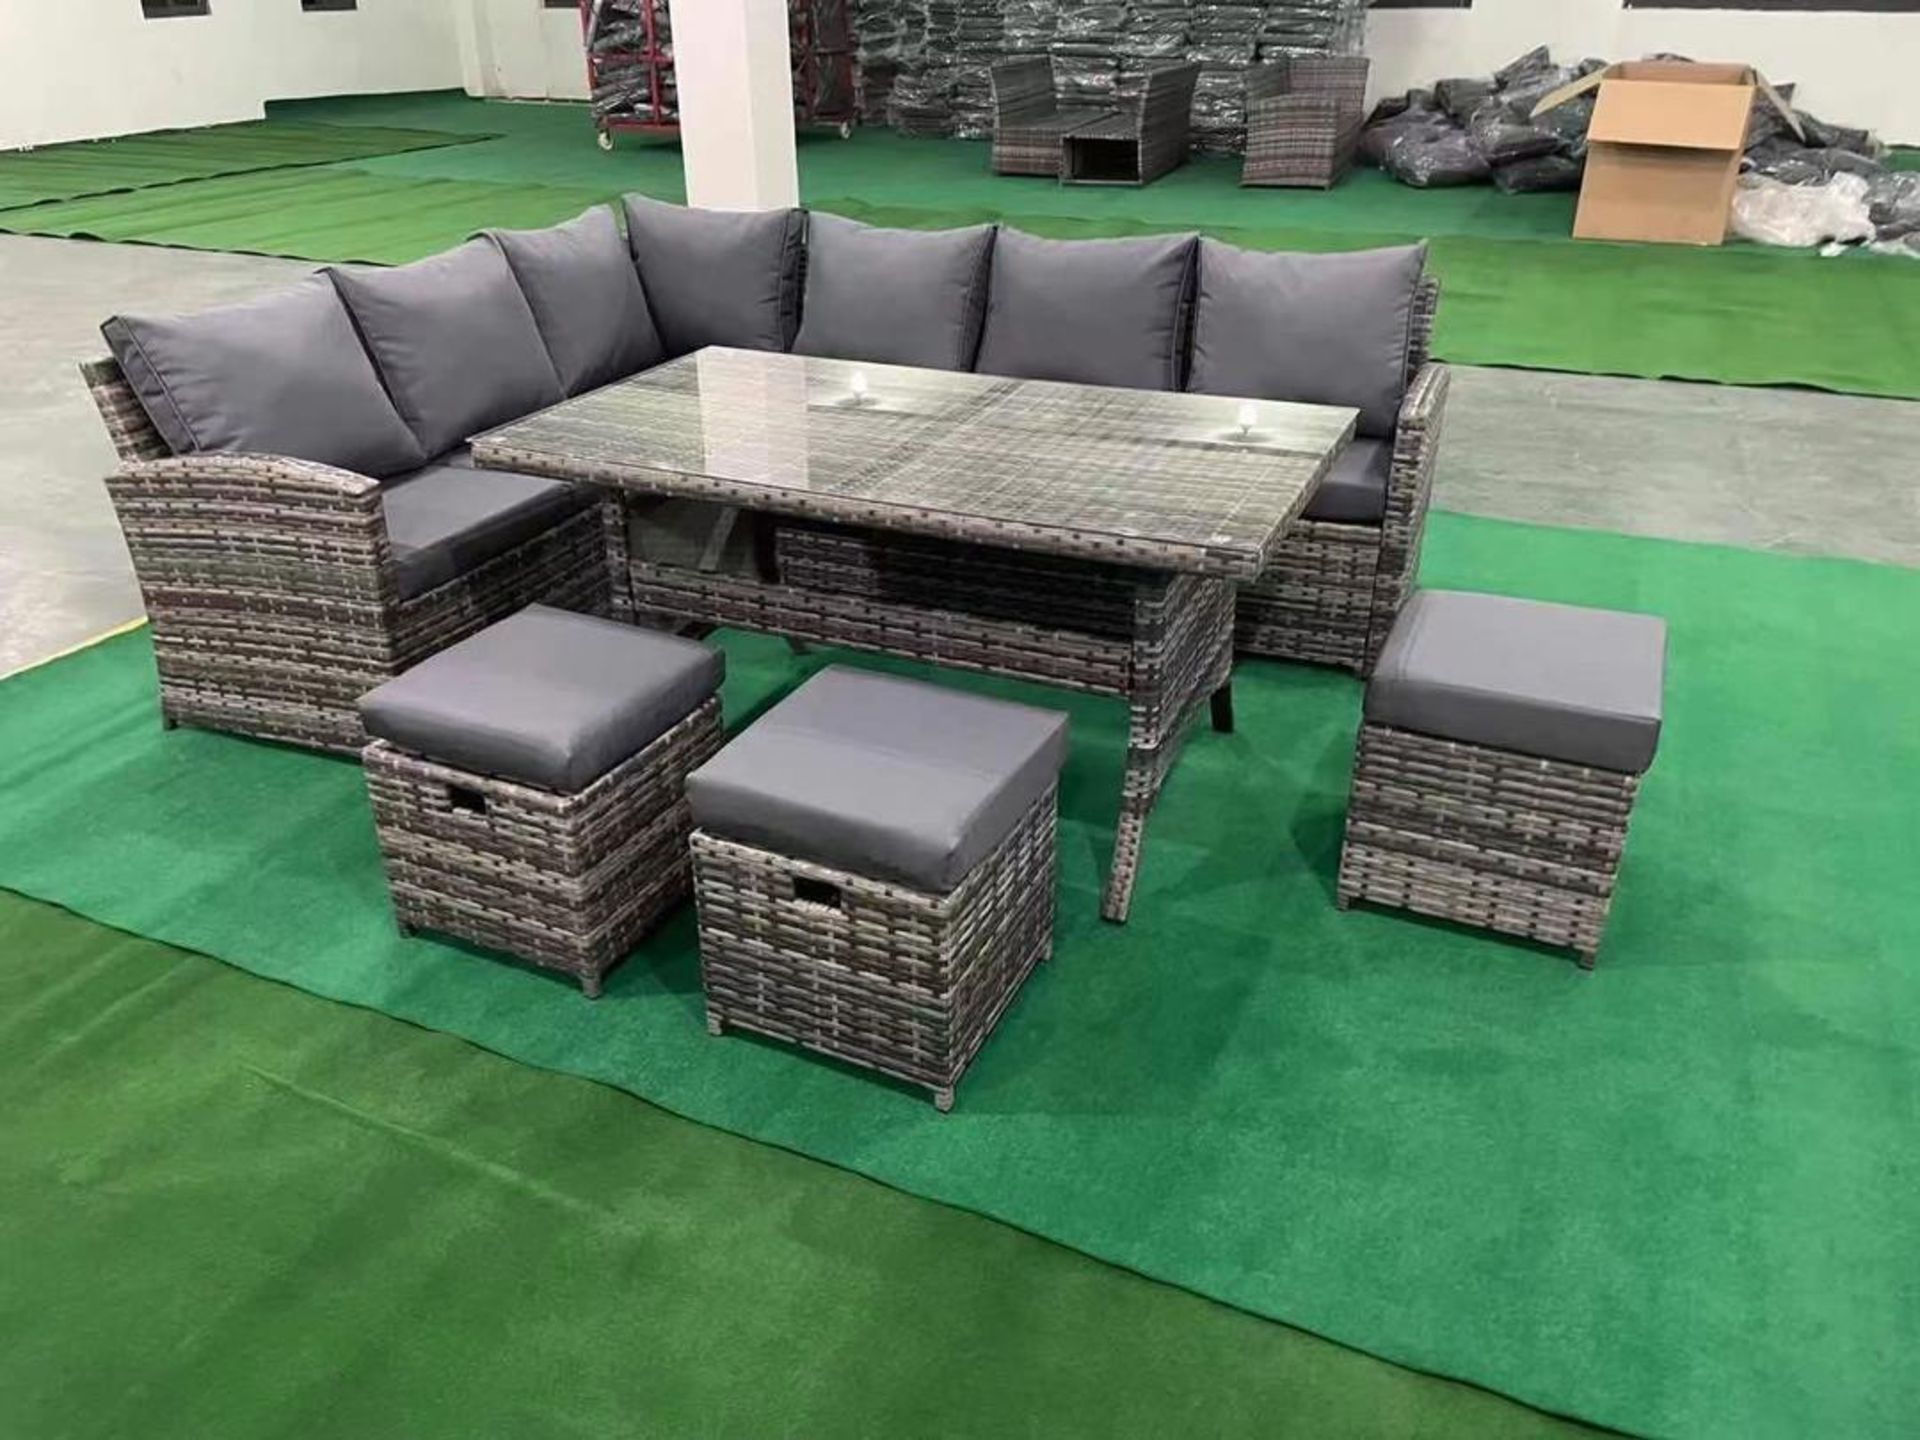 BRAND NEW 8 SEATER RATTAN SET, DARK GREY WITH MATCHING GREY 10cm DEEP CUSHIONS, RRP OVER £1299